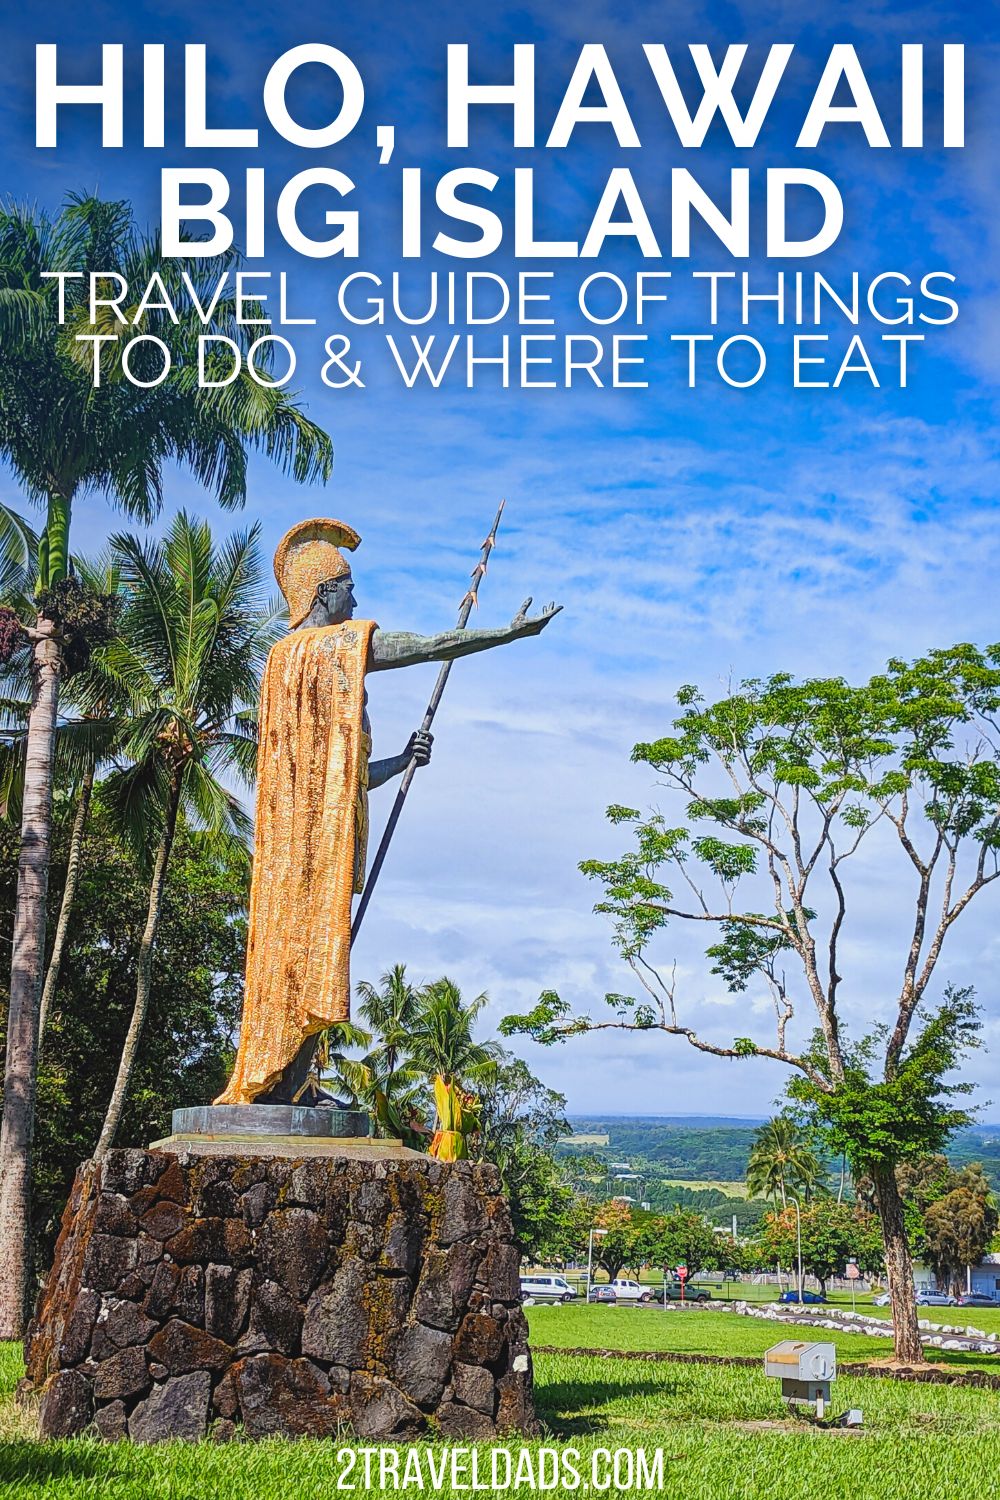 This Hilo Travel Guide is the go-to resource for the best things to do in Hilo, Hawaii from waterfalls to where to shop and support locally. Where to eat in Hilo, tour recommendations and what to add to your Hilo itinerary.